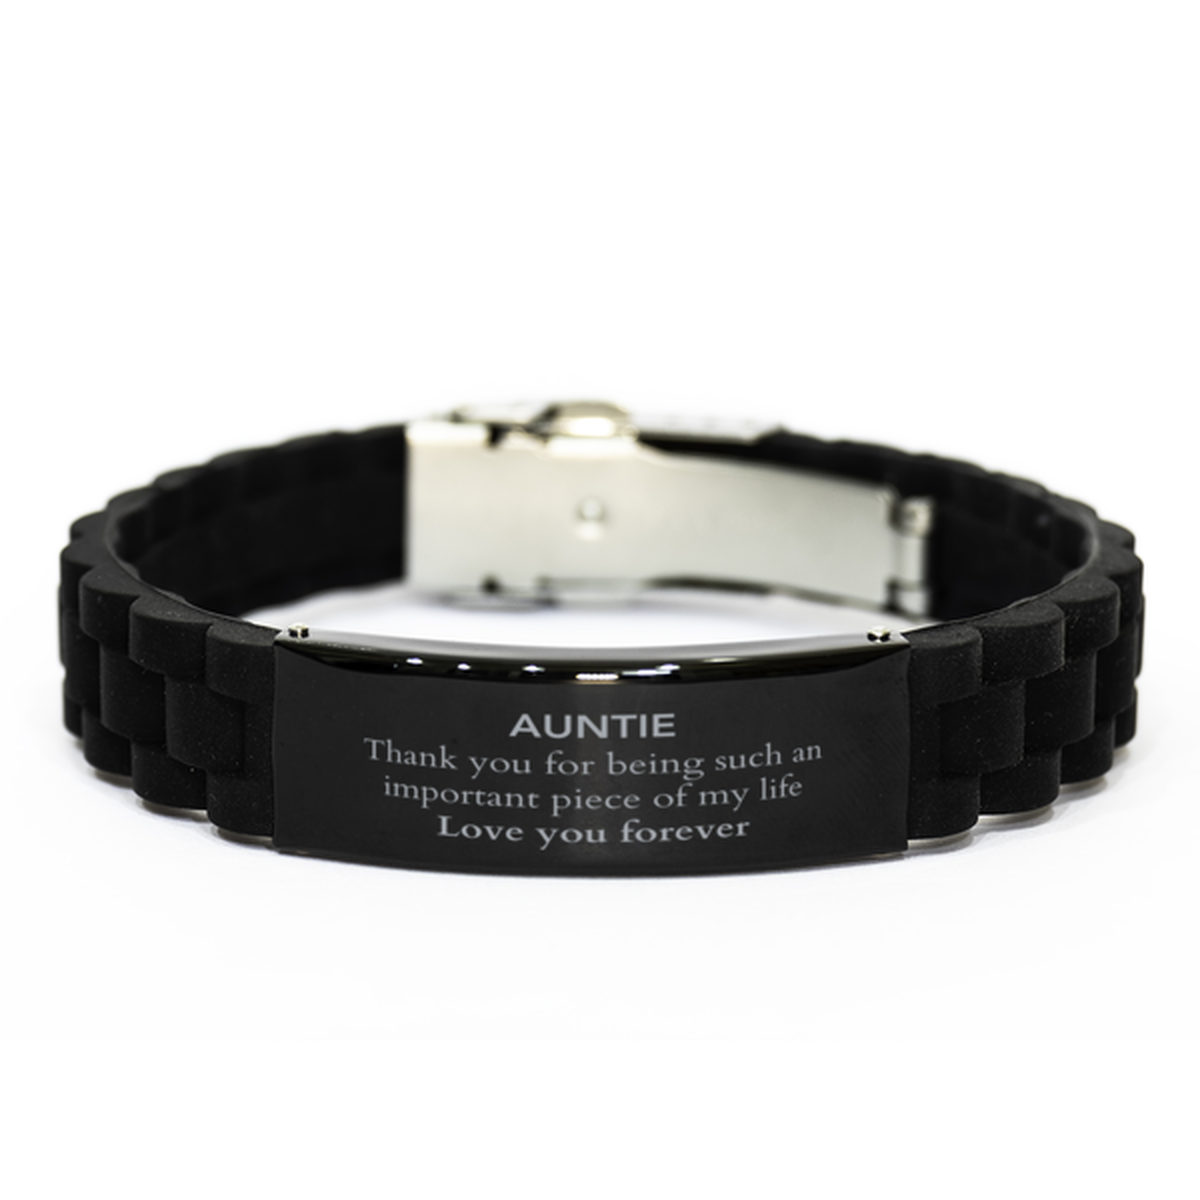 Appropriate Auntie Black Glidelock Clasp Bracelet Epic Birthday Gifts for Auntie Thank you for being such an important piece of my life Auntie Christmas Mothers Fathers Day